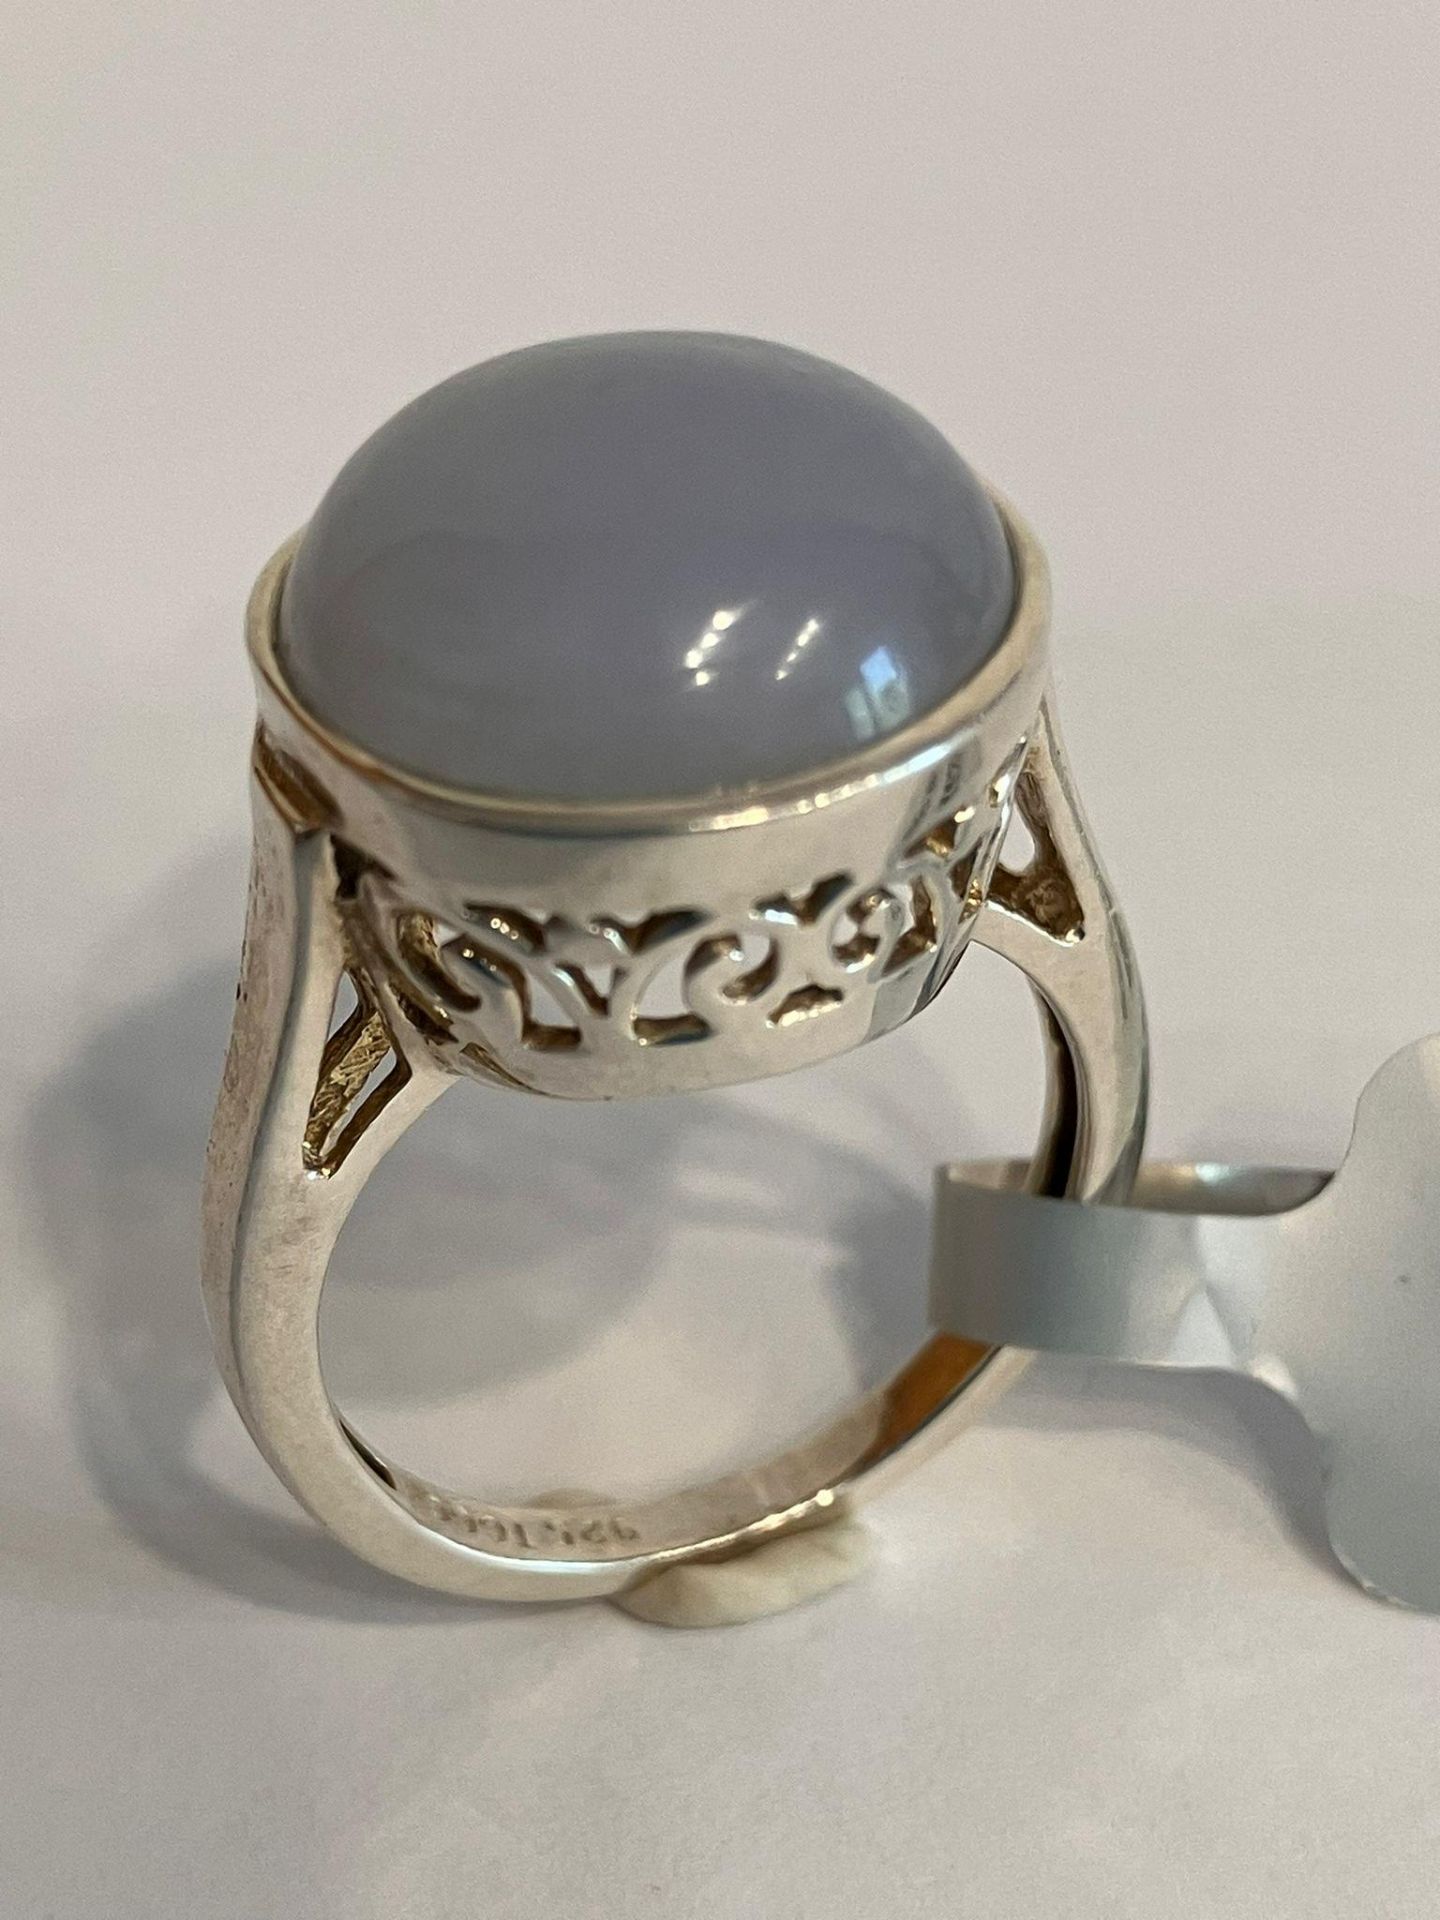 SILVER and MOONSTONE CABACHON RING. Consisting a large circular Moonstone set in a Beautiful Pierced